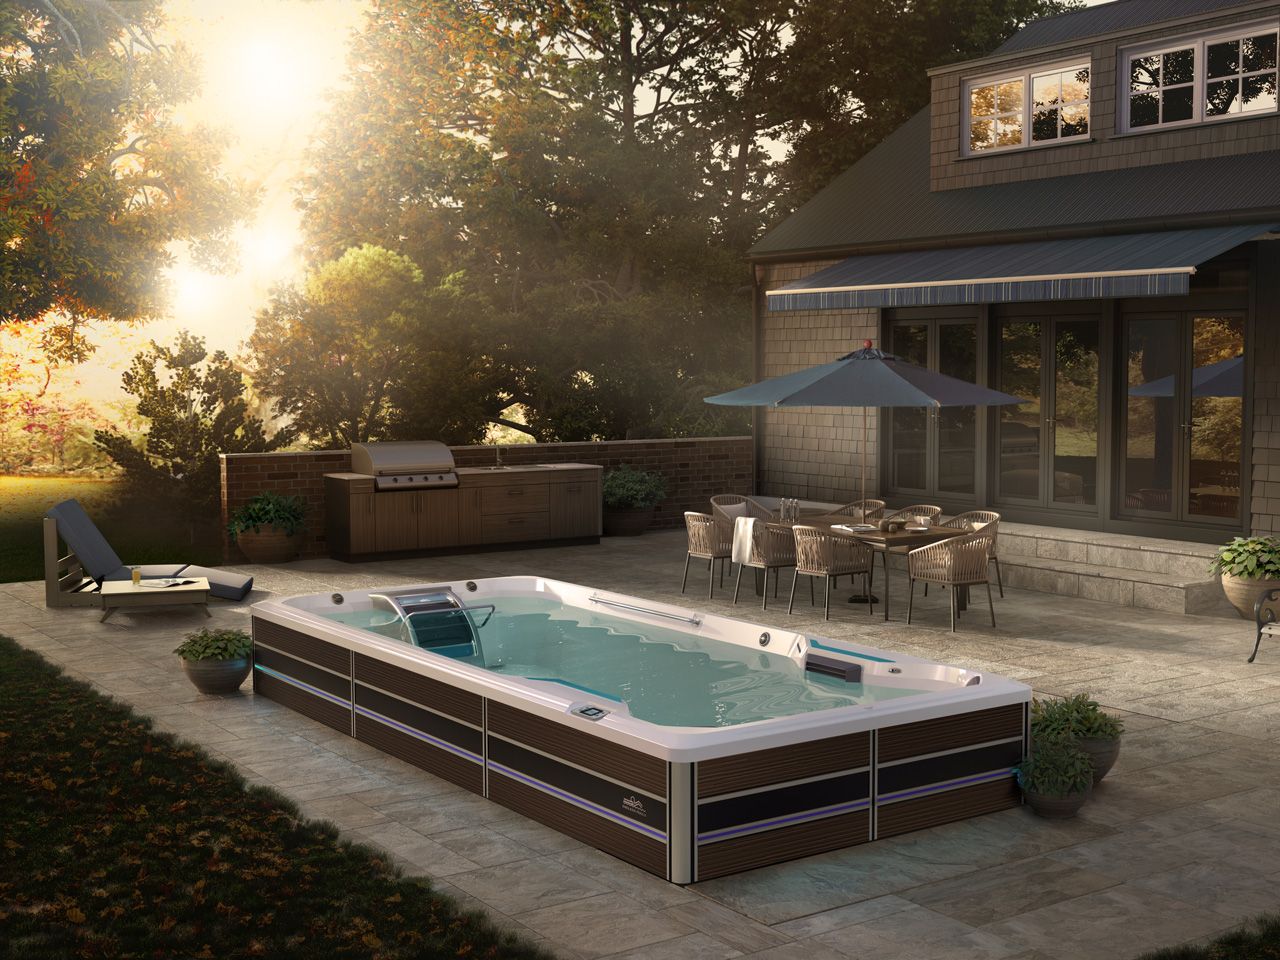 A picture of a swim spa on a beautiful deck, surrounded by furniture and nature as the sun sets through the trees.